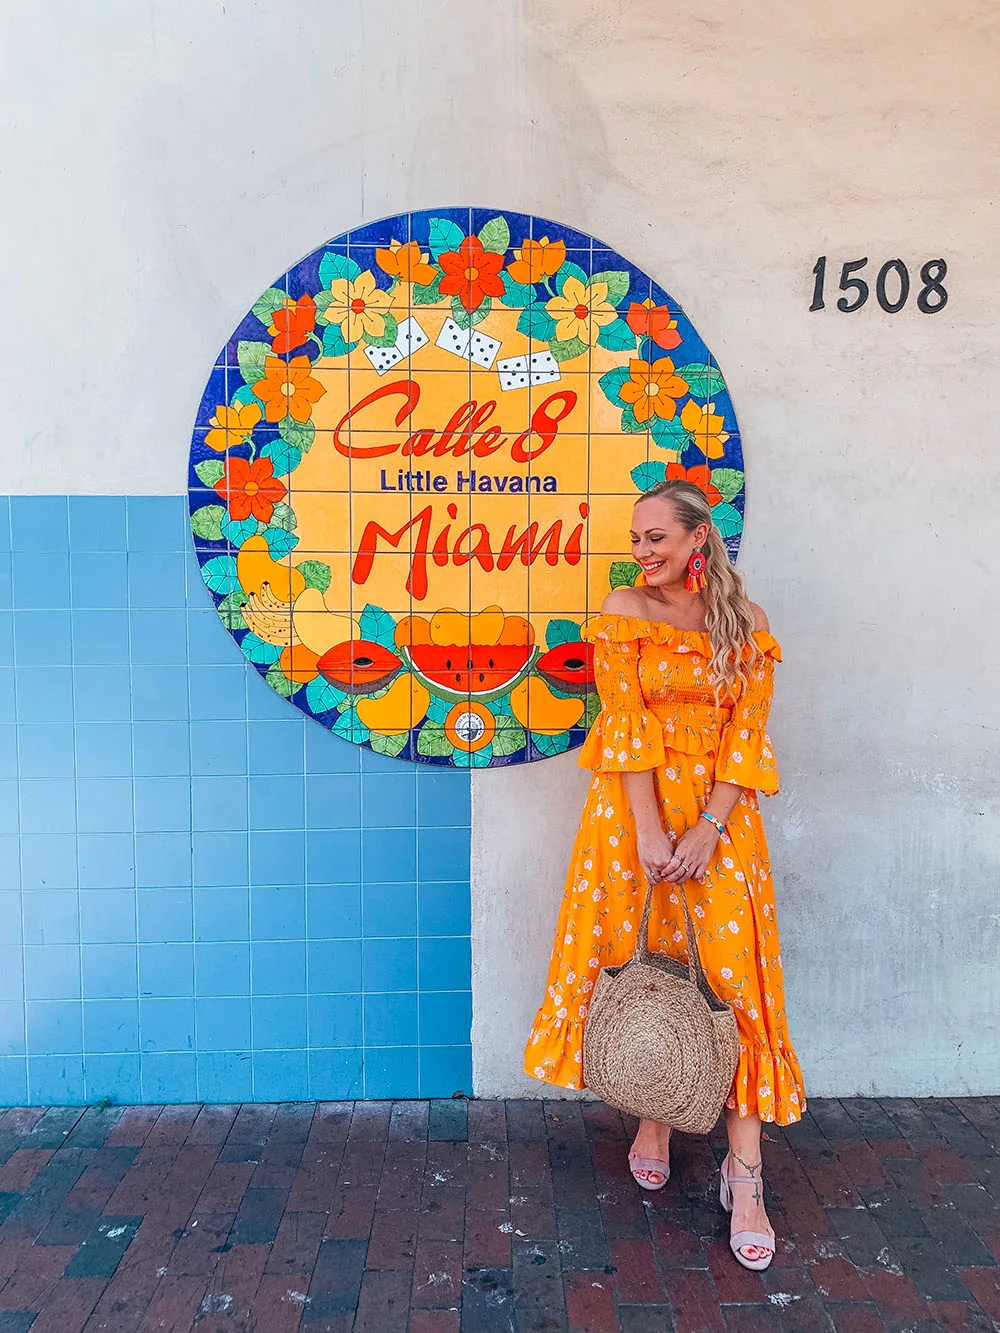 So you've planned a wonderful 4 day trip to Miami and now you're looking for the perfect itinerary for your visit… well, this guide is for you! I’ve put together the ultimate 4 days in Miami itinerary that will have you seeing and experiencing all of Miami’s top sights and attractions. From South Beach to Little Havana, the Wynwood Arts District to the Everglades, and even a day trip to Key West! This really is the perfect 4 day itinerary to get the most out of your time in Miami. Pictured here: Exploring Little Havana